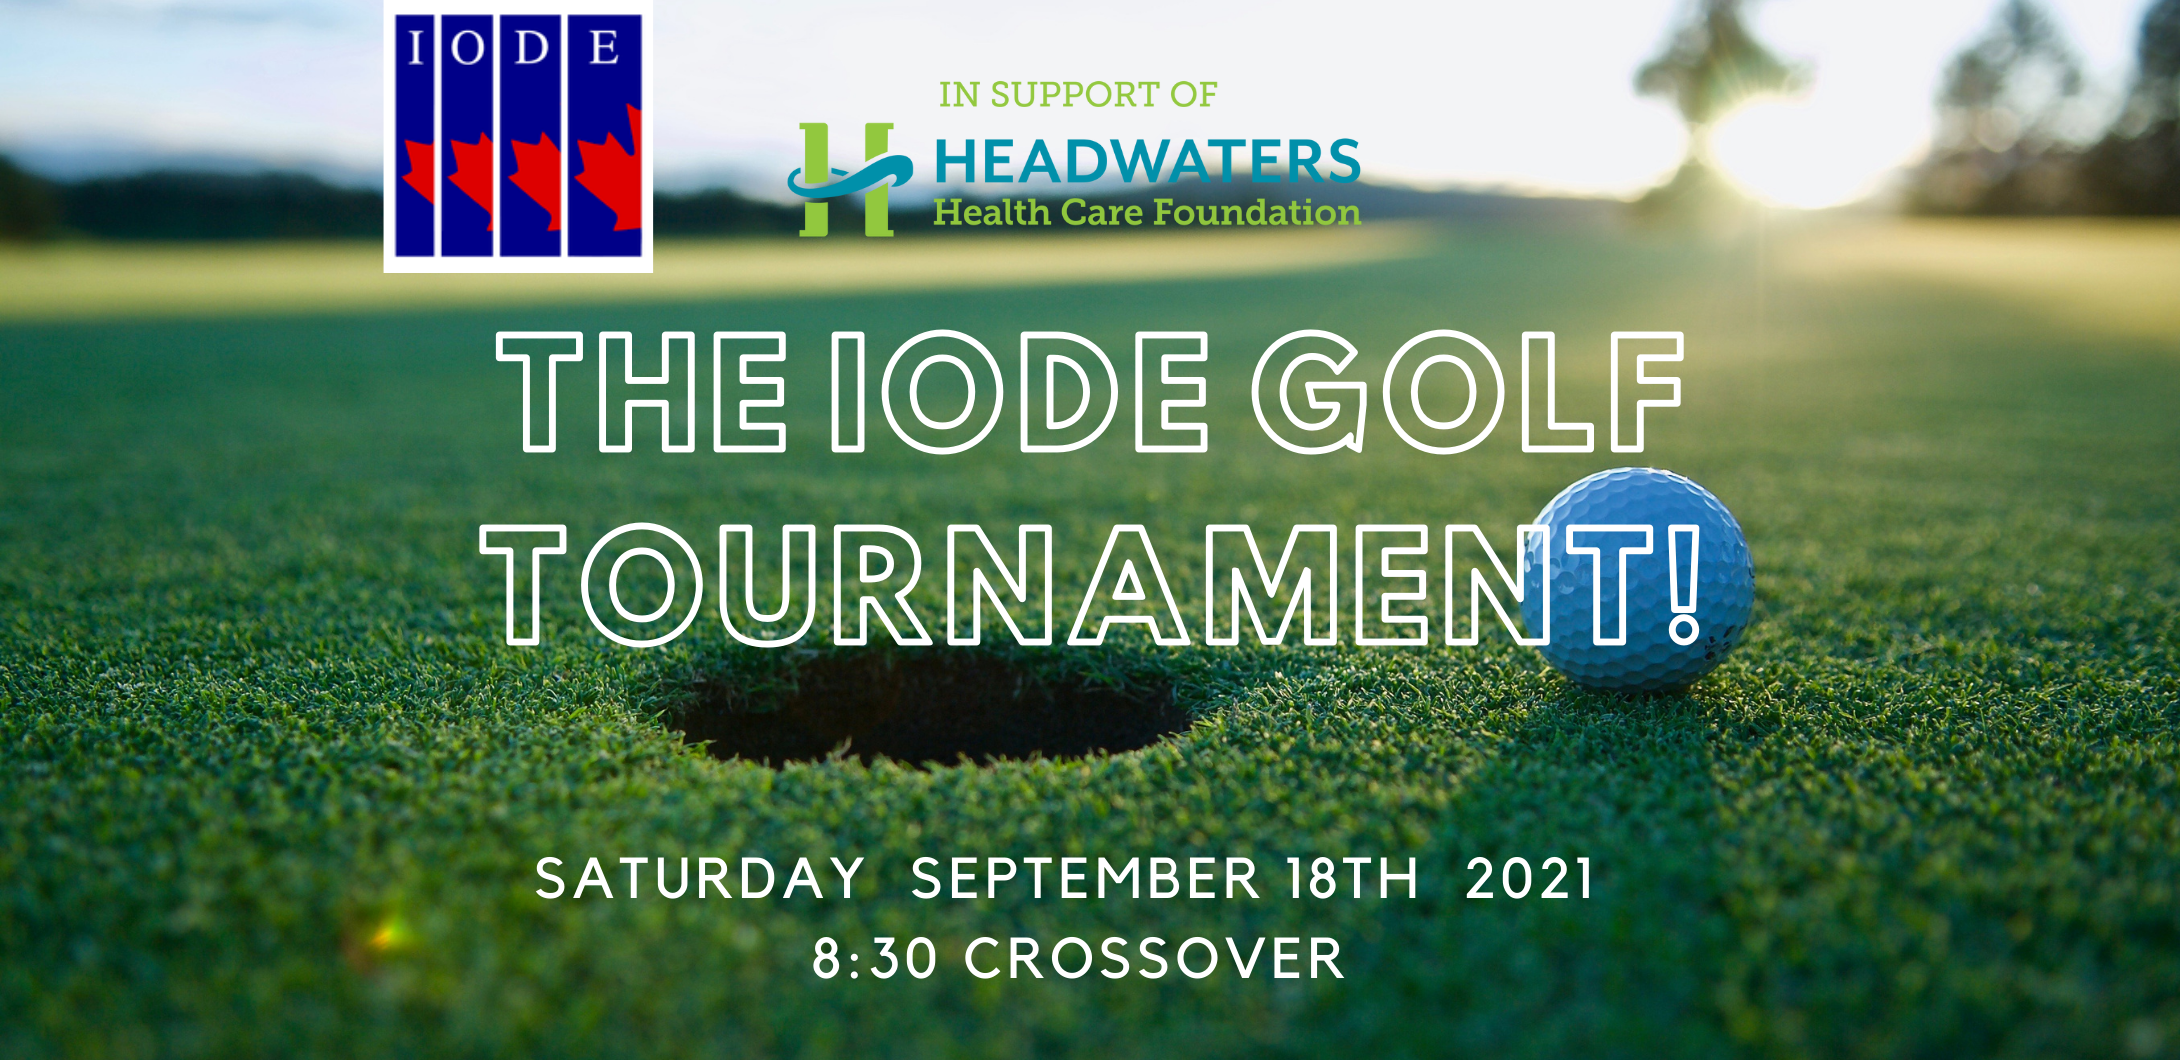 IODE Headwaters Golf Tournament